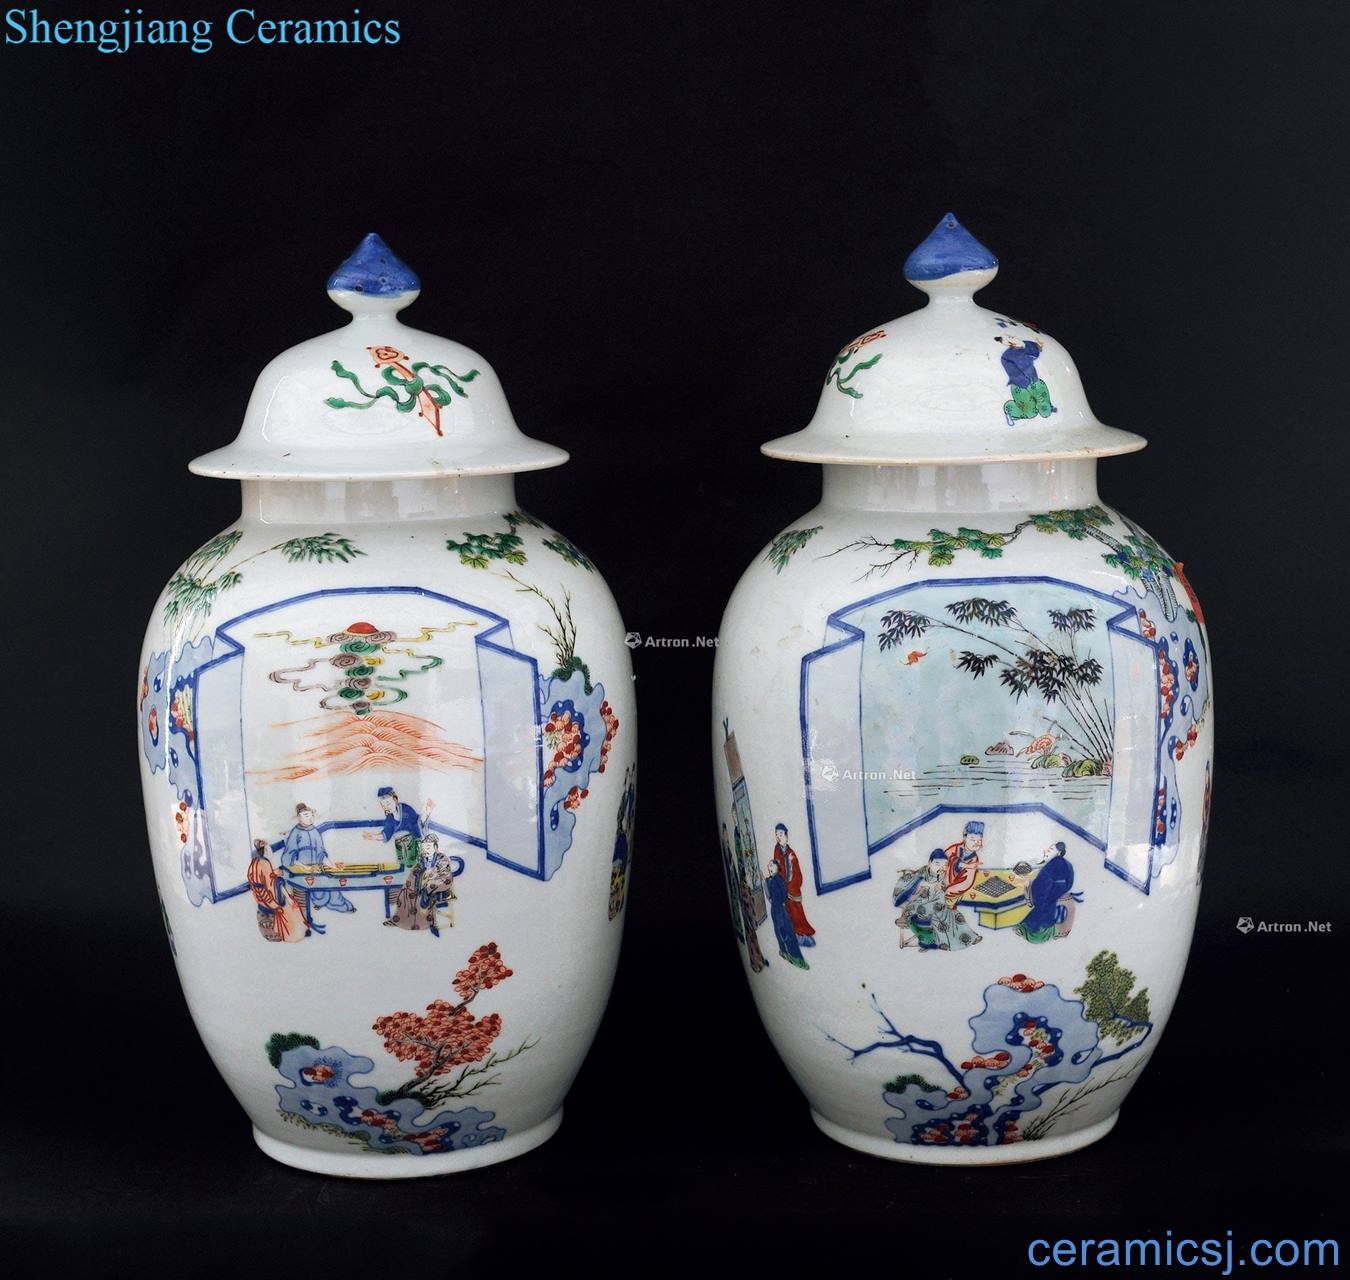 Stories of the qing emperor kangxi colorful figure tank (a)